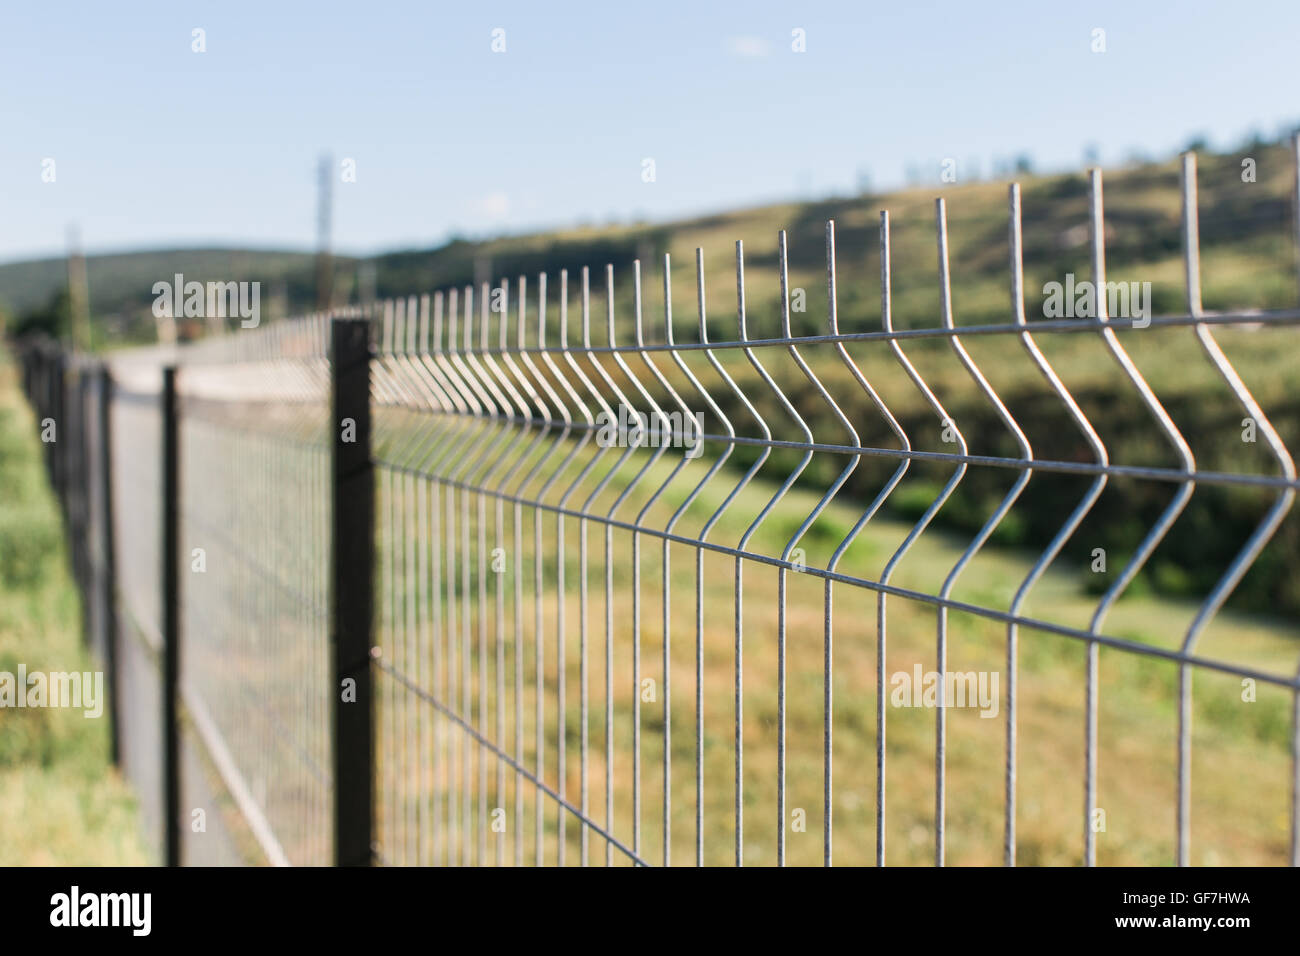 border or private zone with wire fence Stock Photo